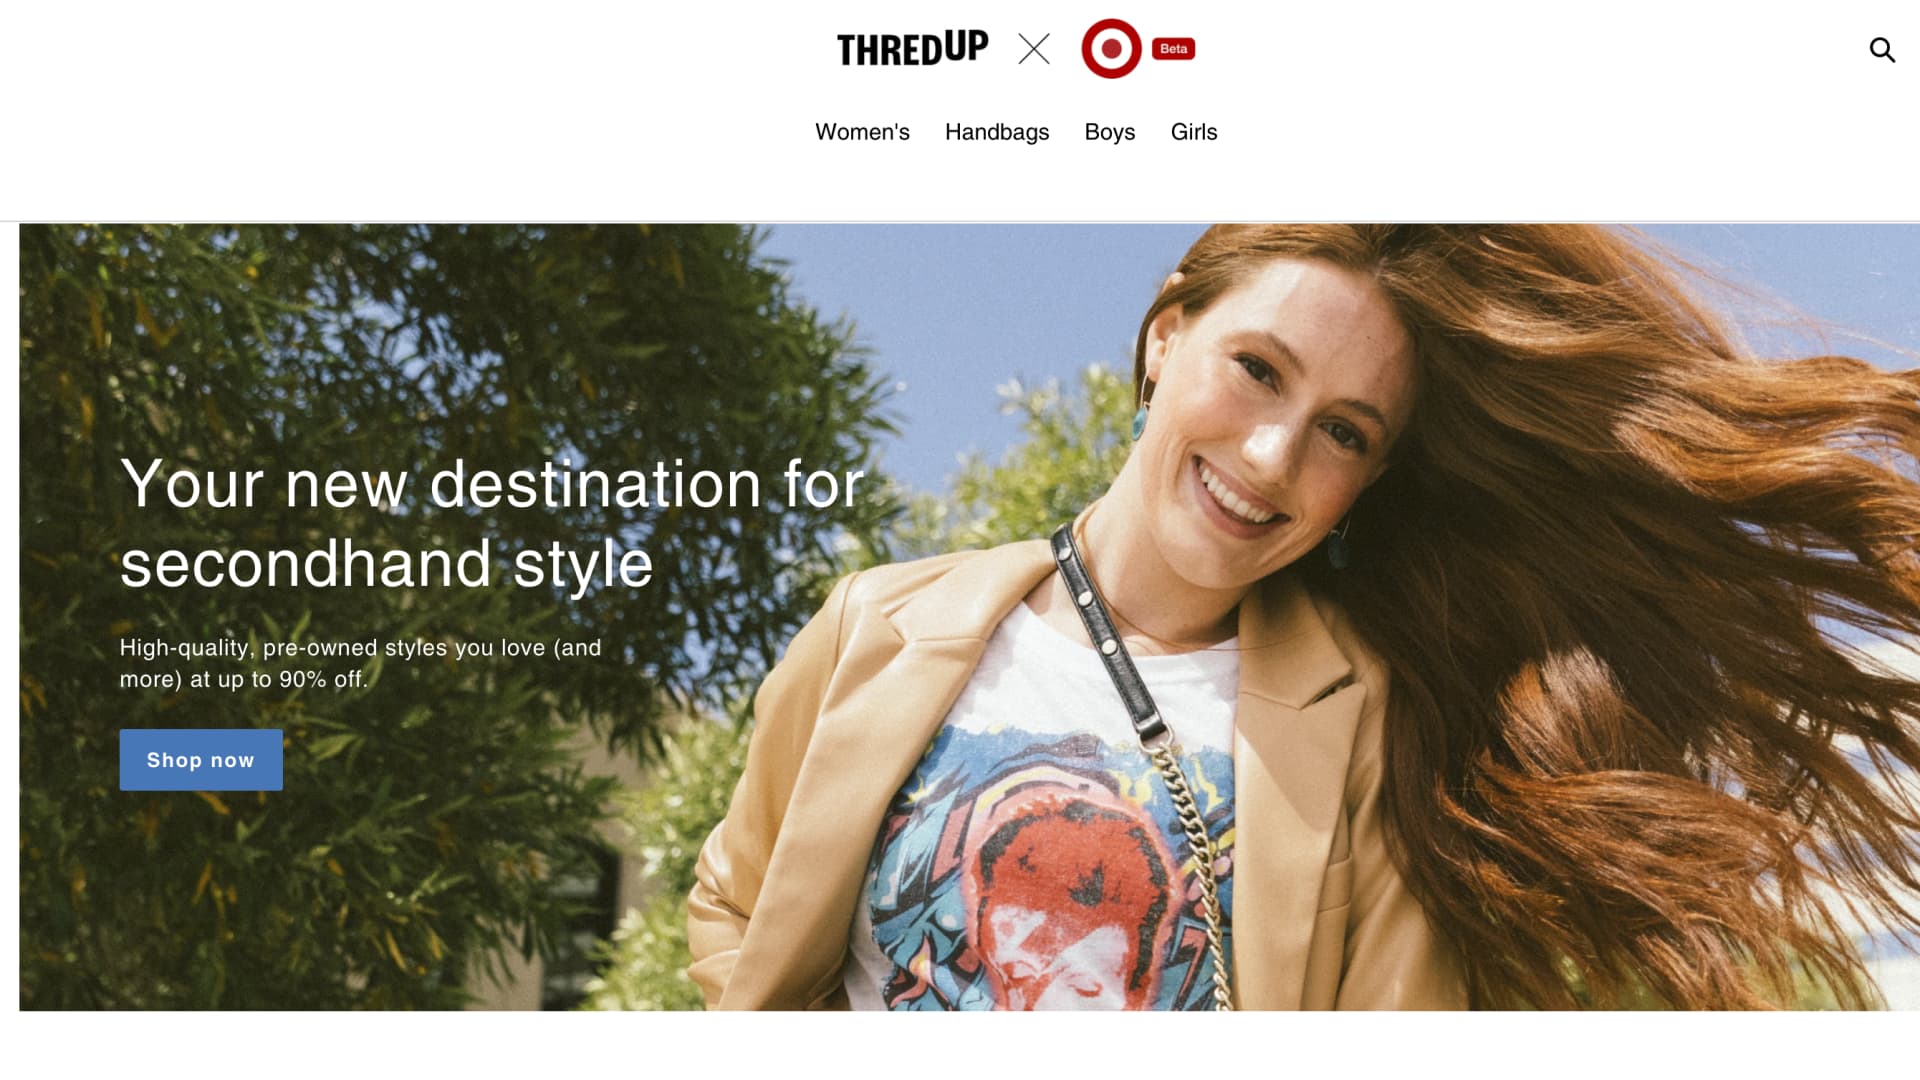 Target tiptoes back into resale with new ThredUp deal